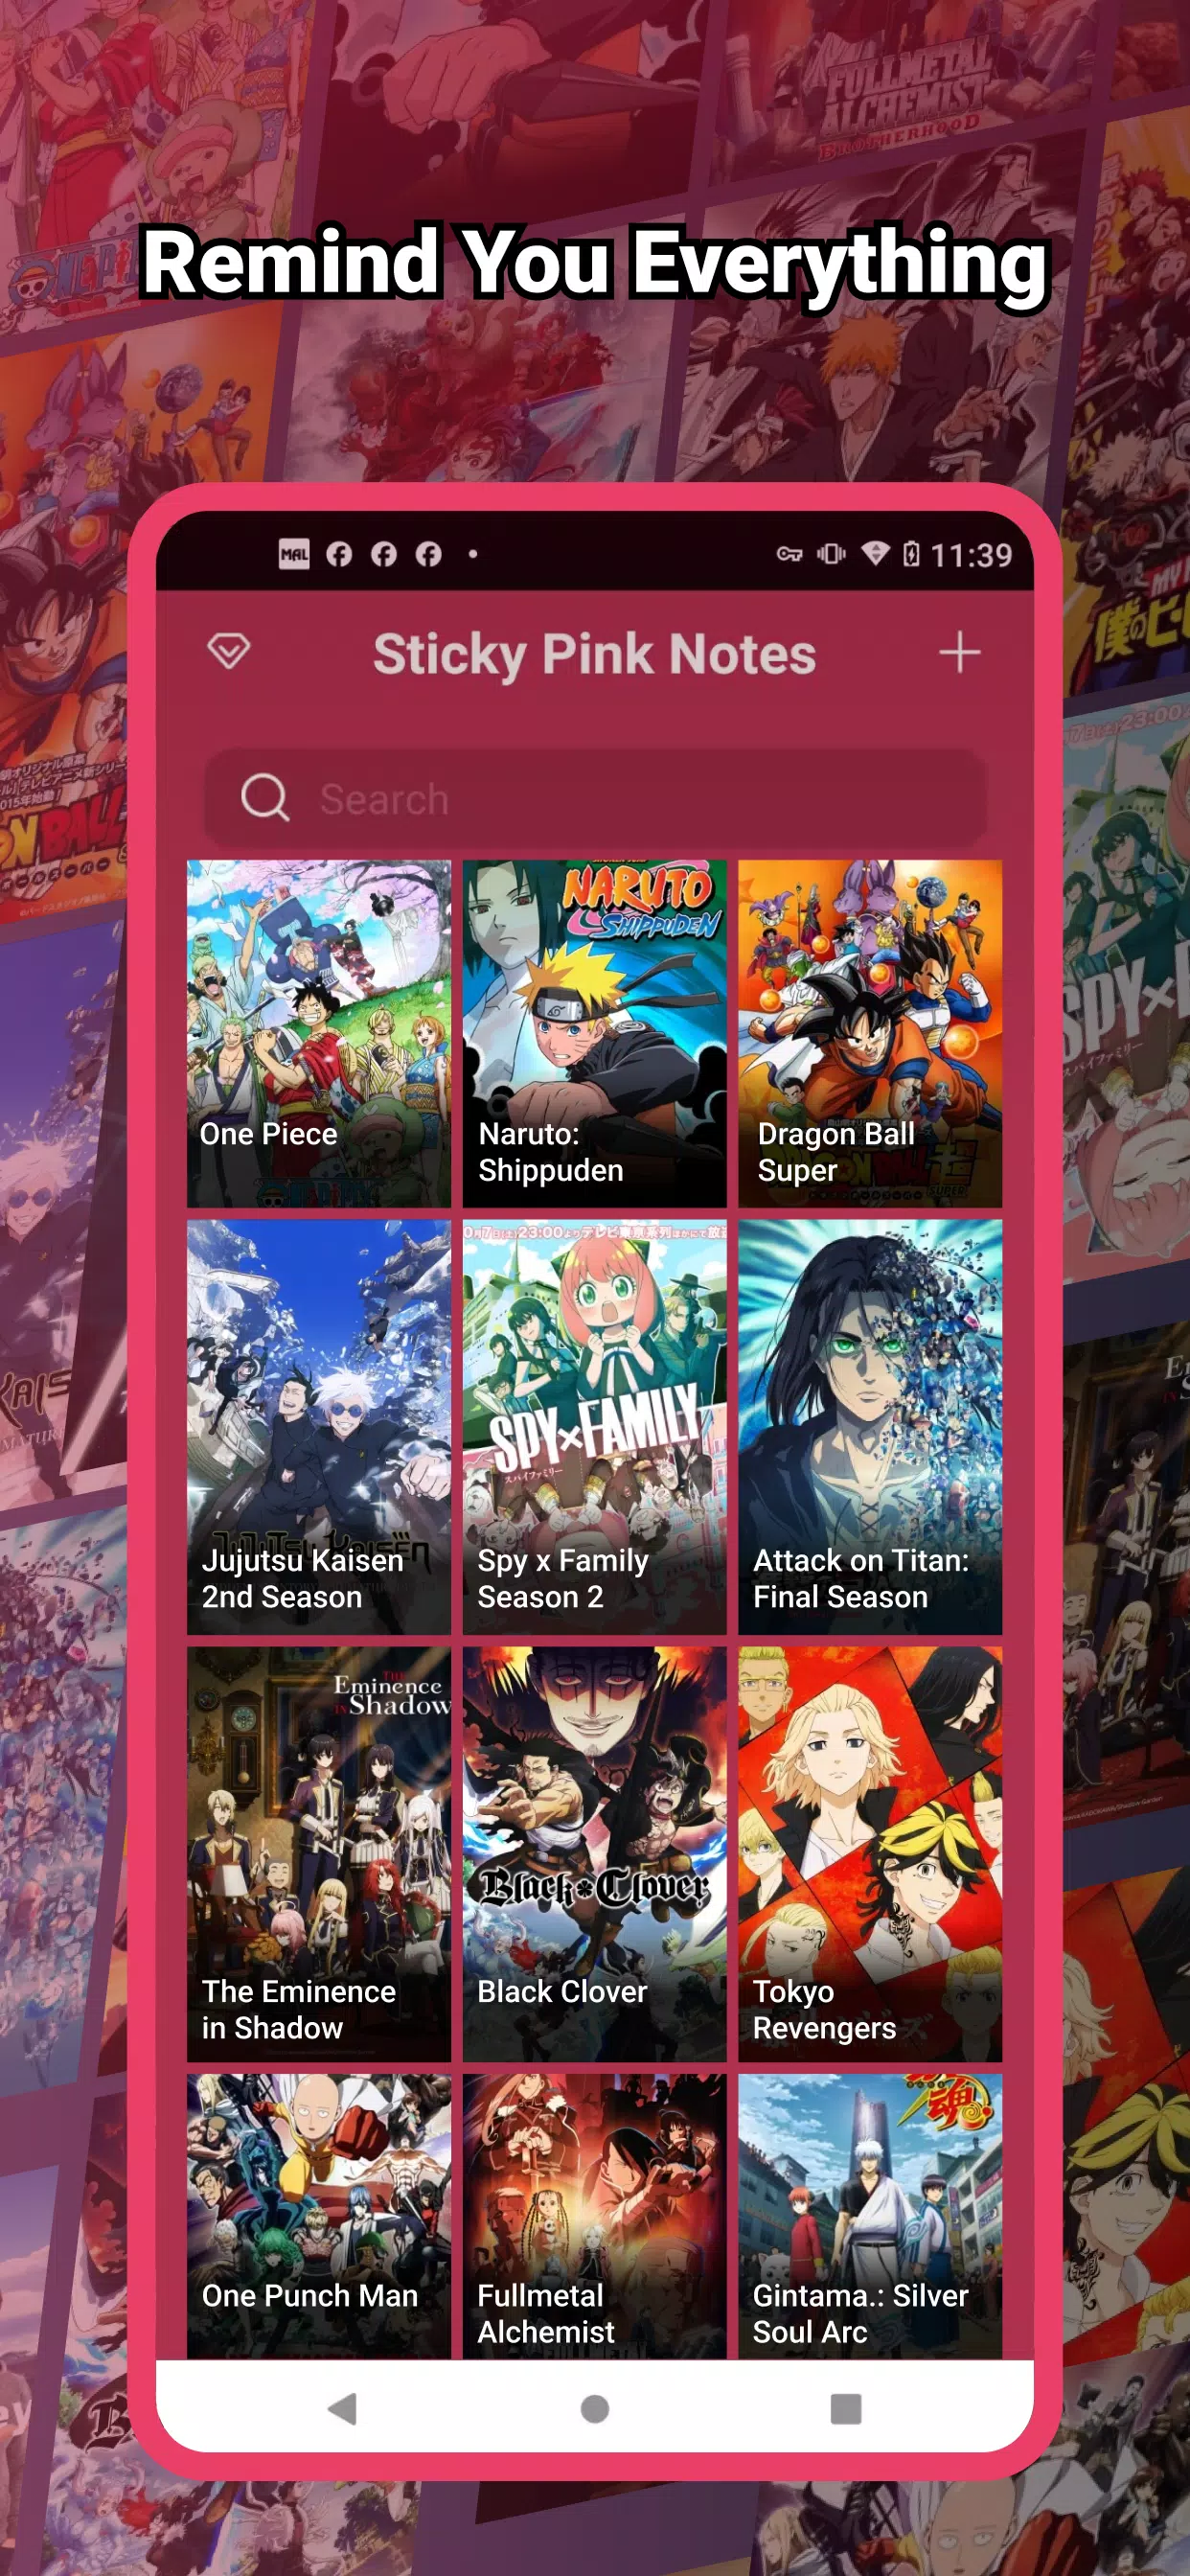 Anime Max APK for Android Download